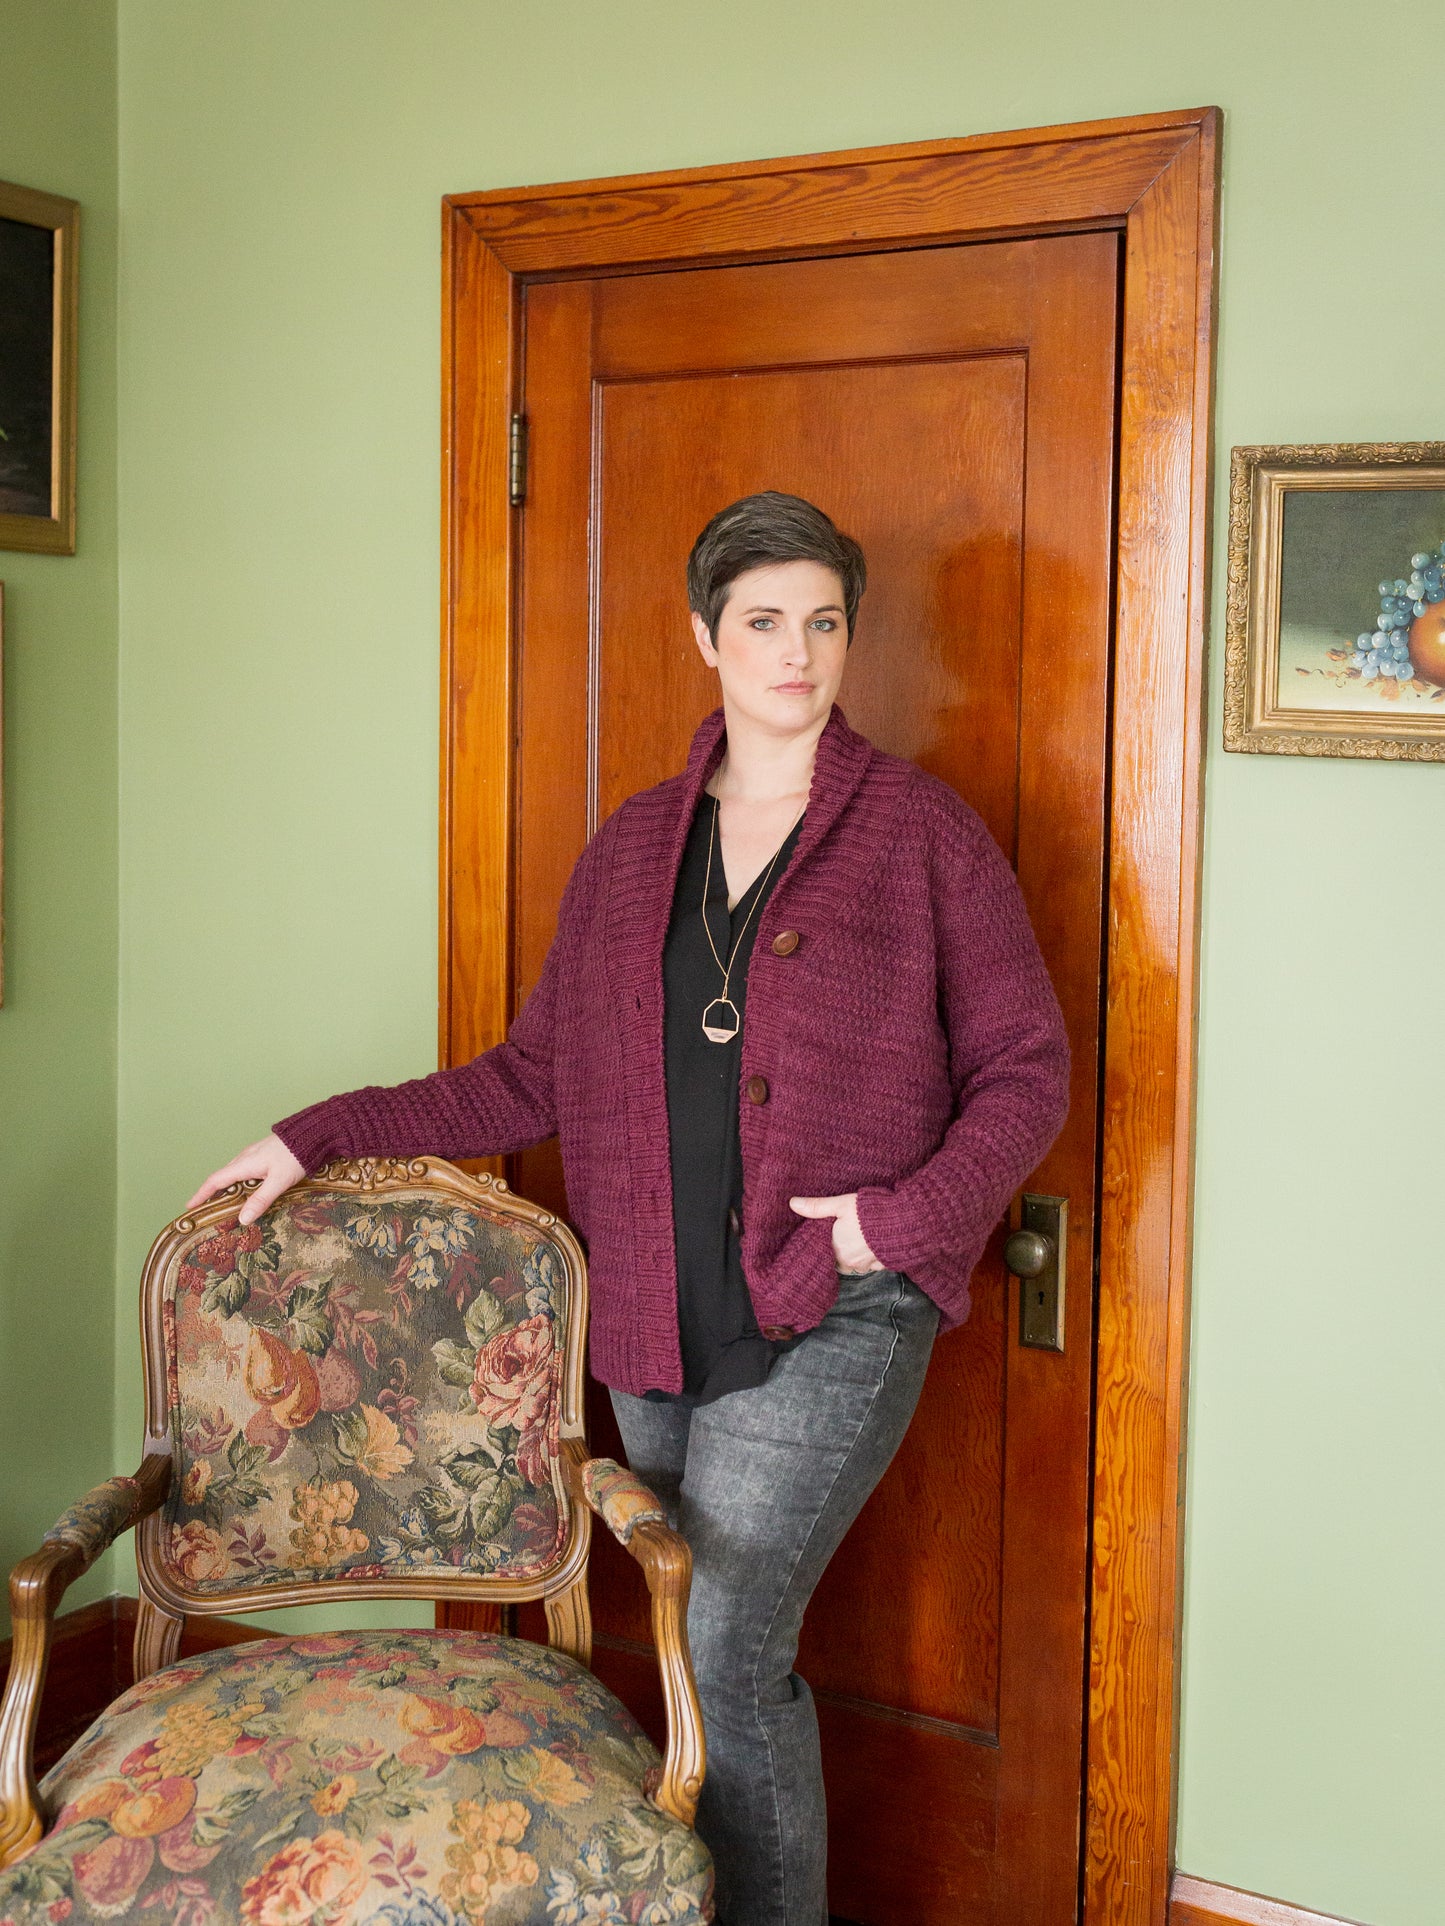 Jen stands, one hand on an antique chair and the other in the pocket of her grey jeans, looking at the camera. She wears a burgundy cardigan, knit with a cowl neck and a large button band.